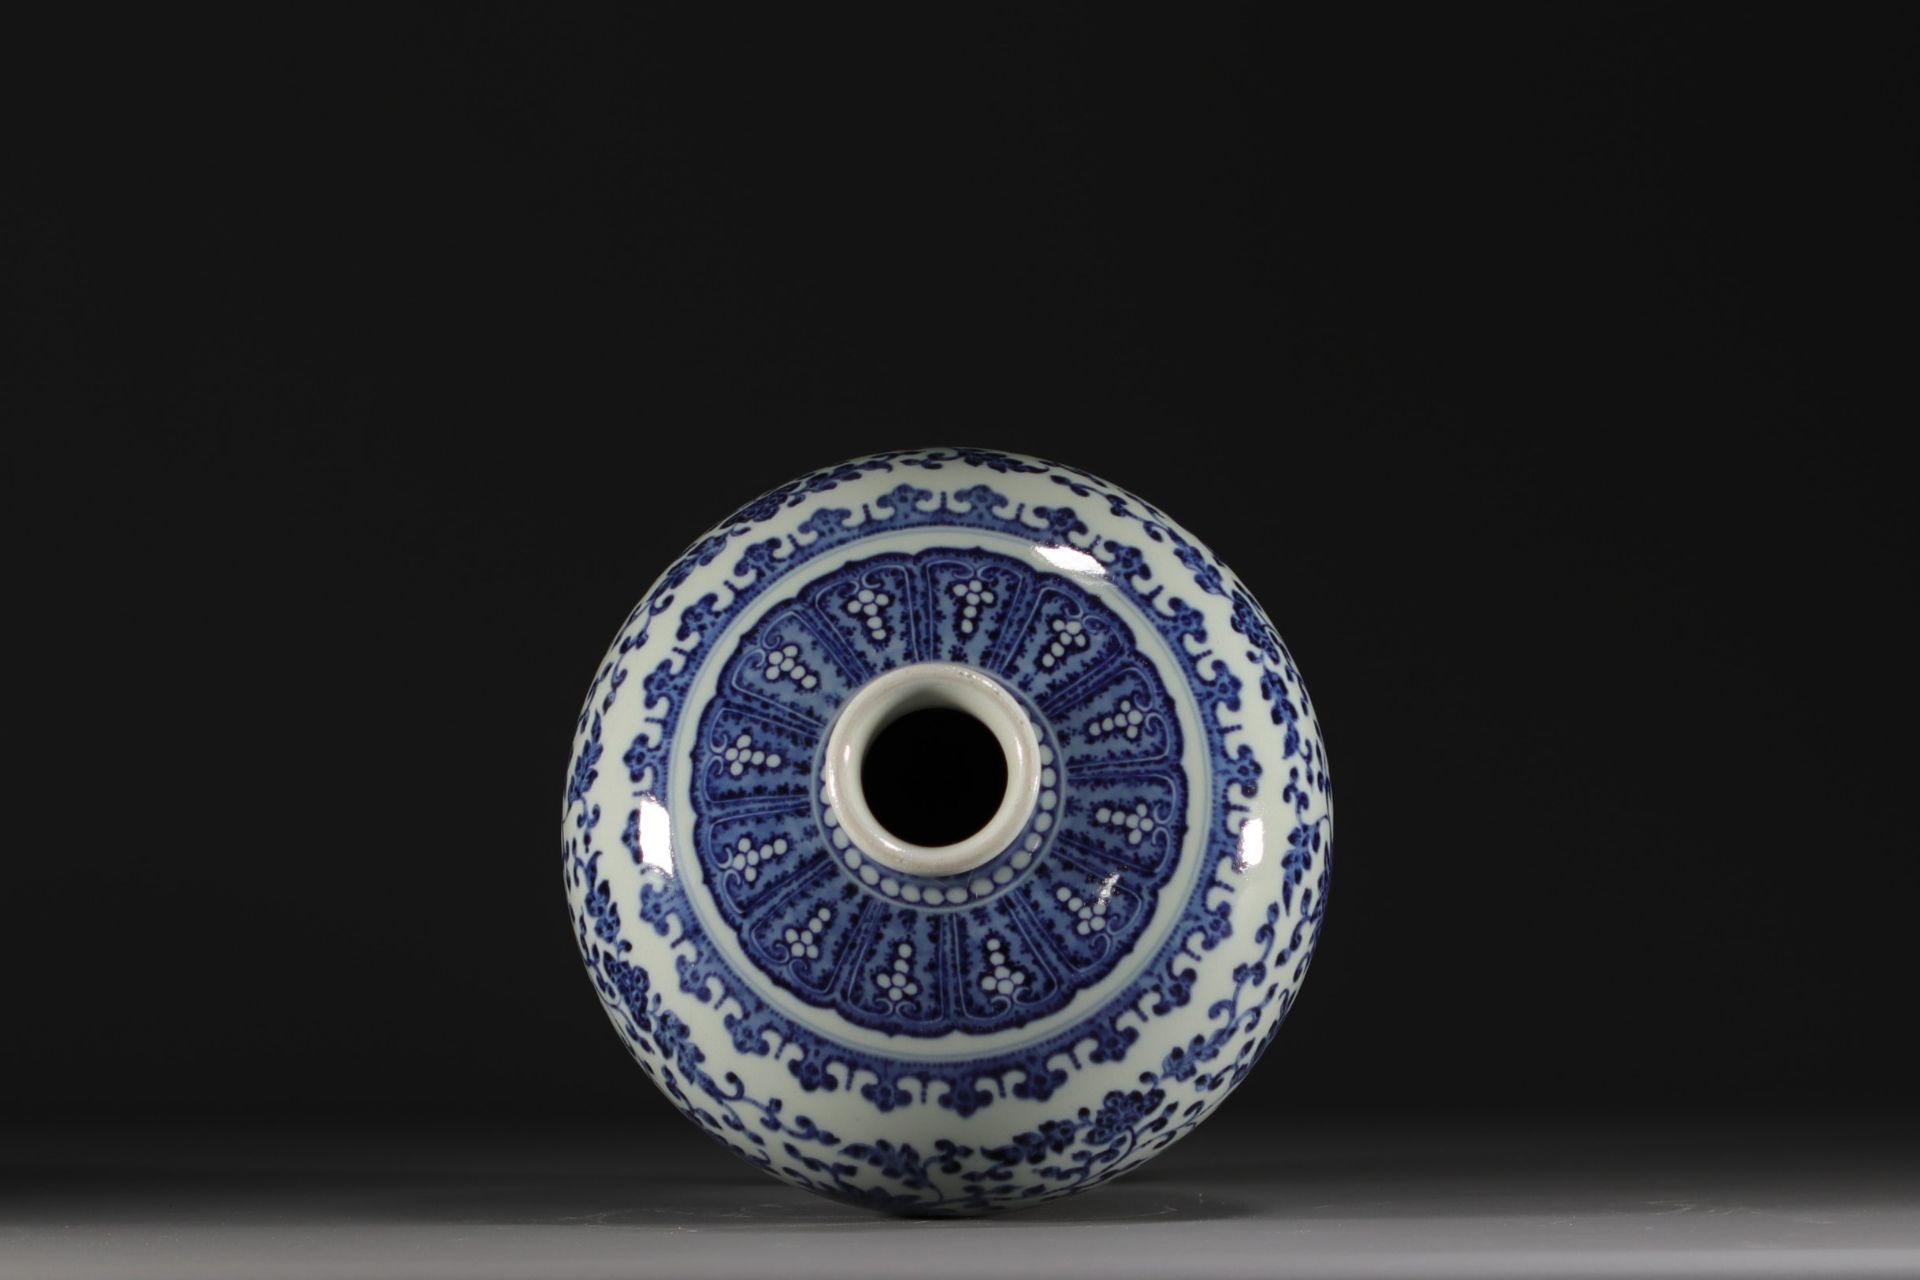 China - A blue and white Meiping vase with floral and banana leaf decoration, Qing period. - Image 3 of 5